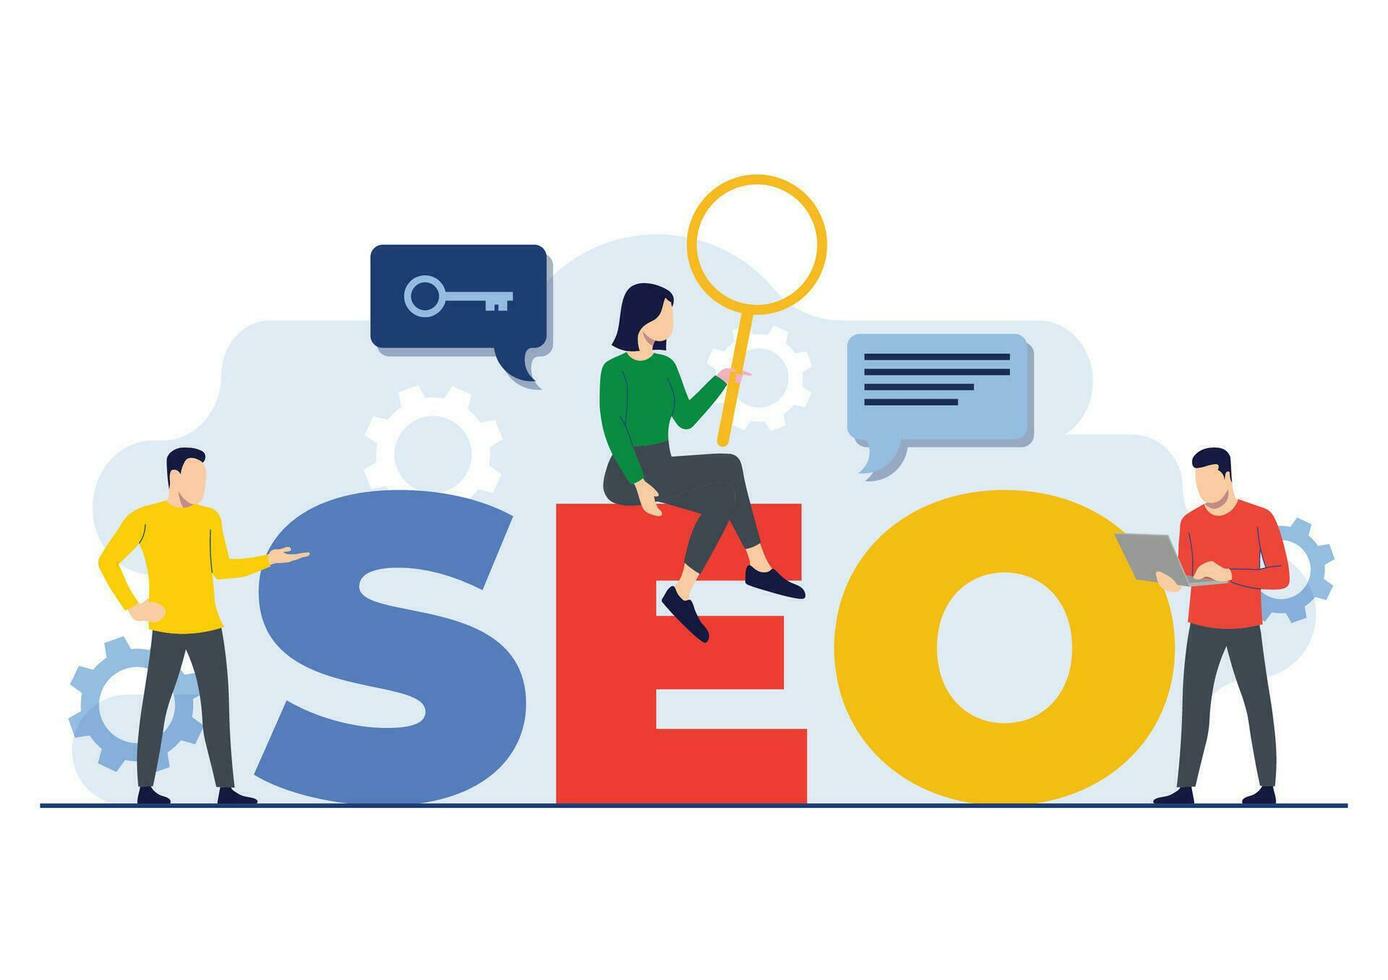 SEO optimization, Search engine optimization, People analysis keywords and optimizing data settings, Performance marketing, analytics and search engine ranking concept vector